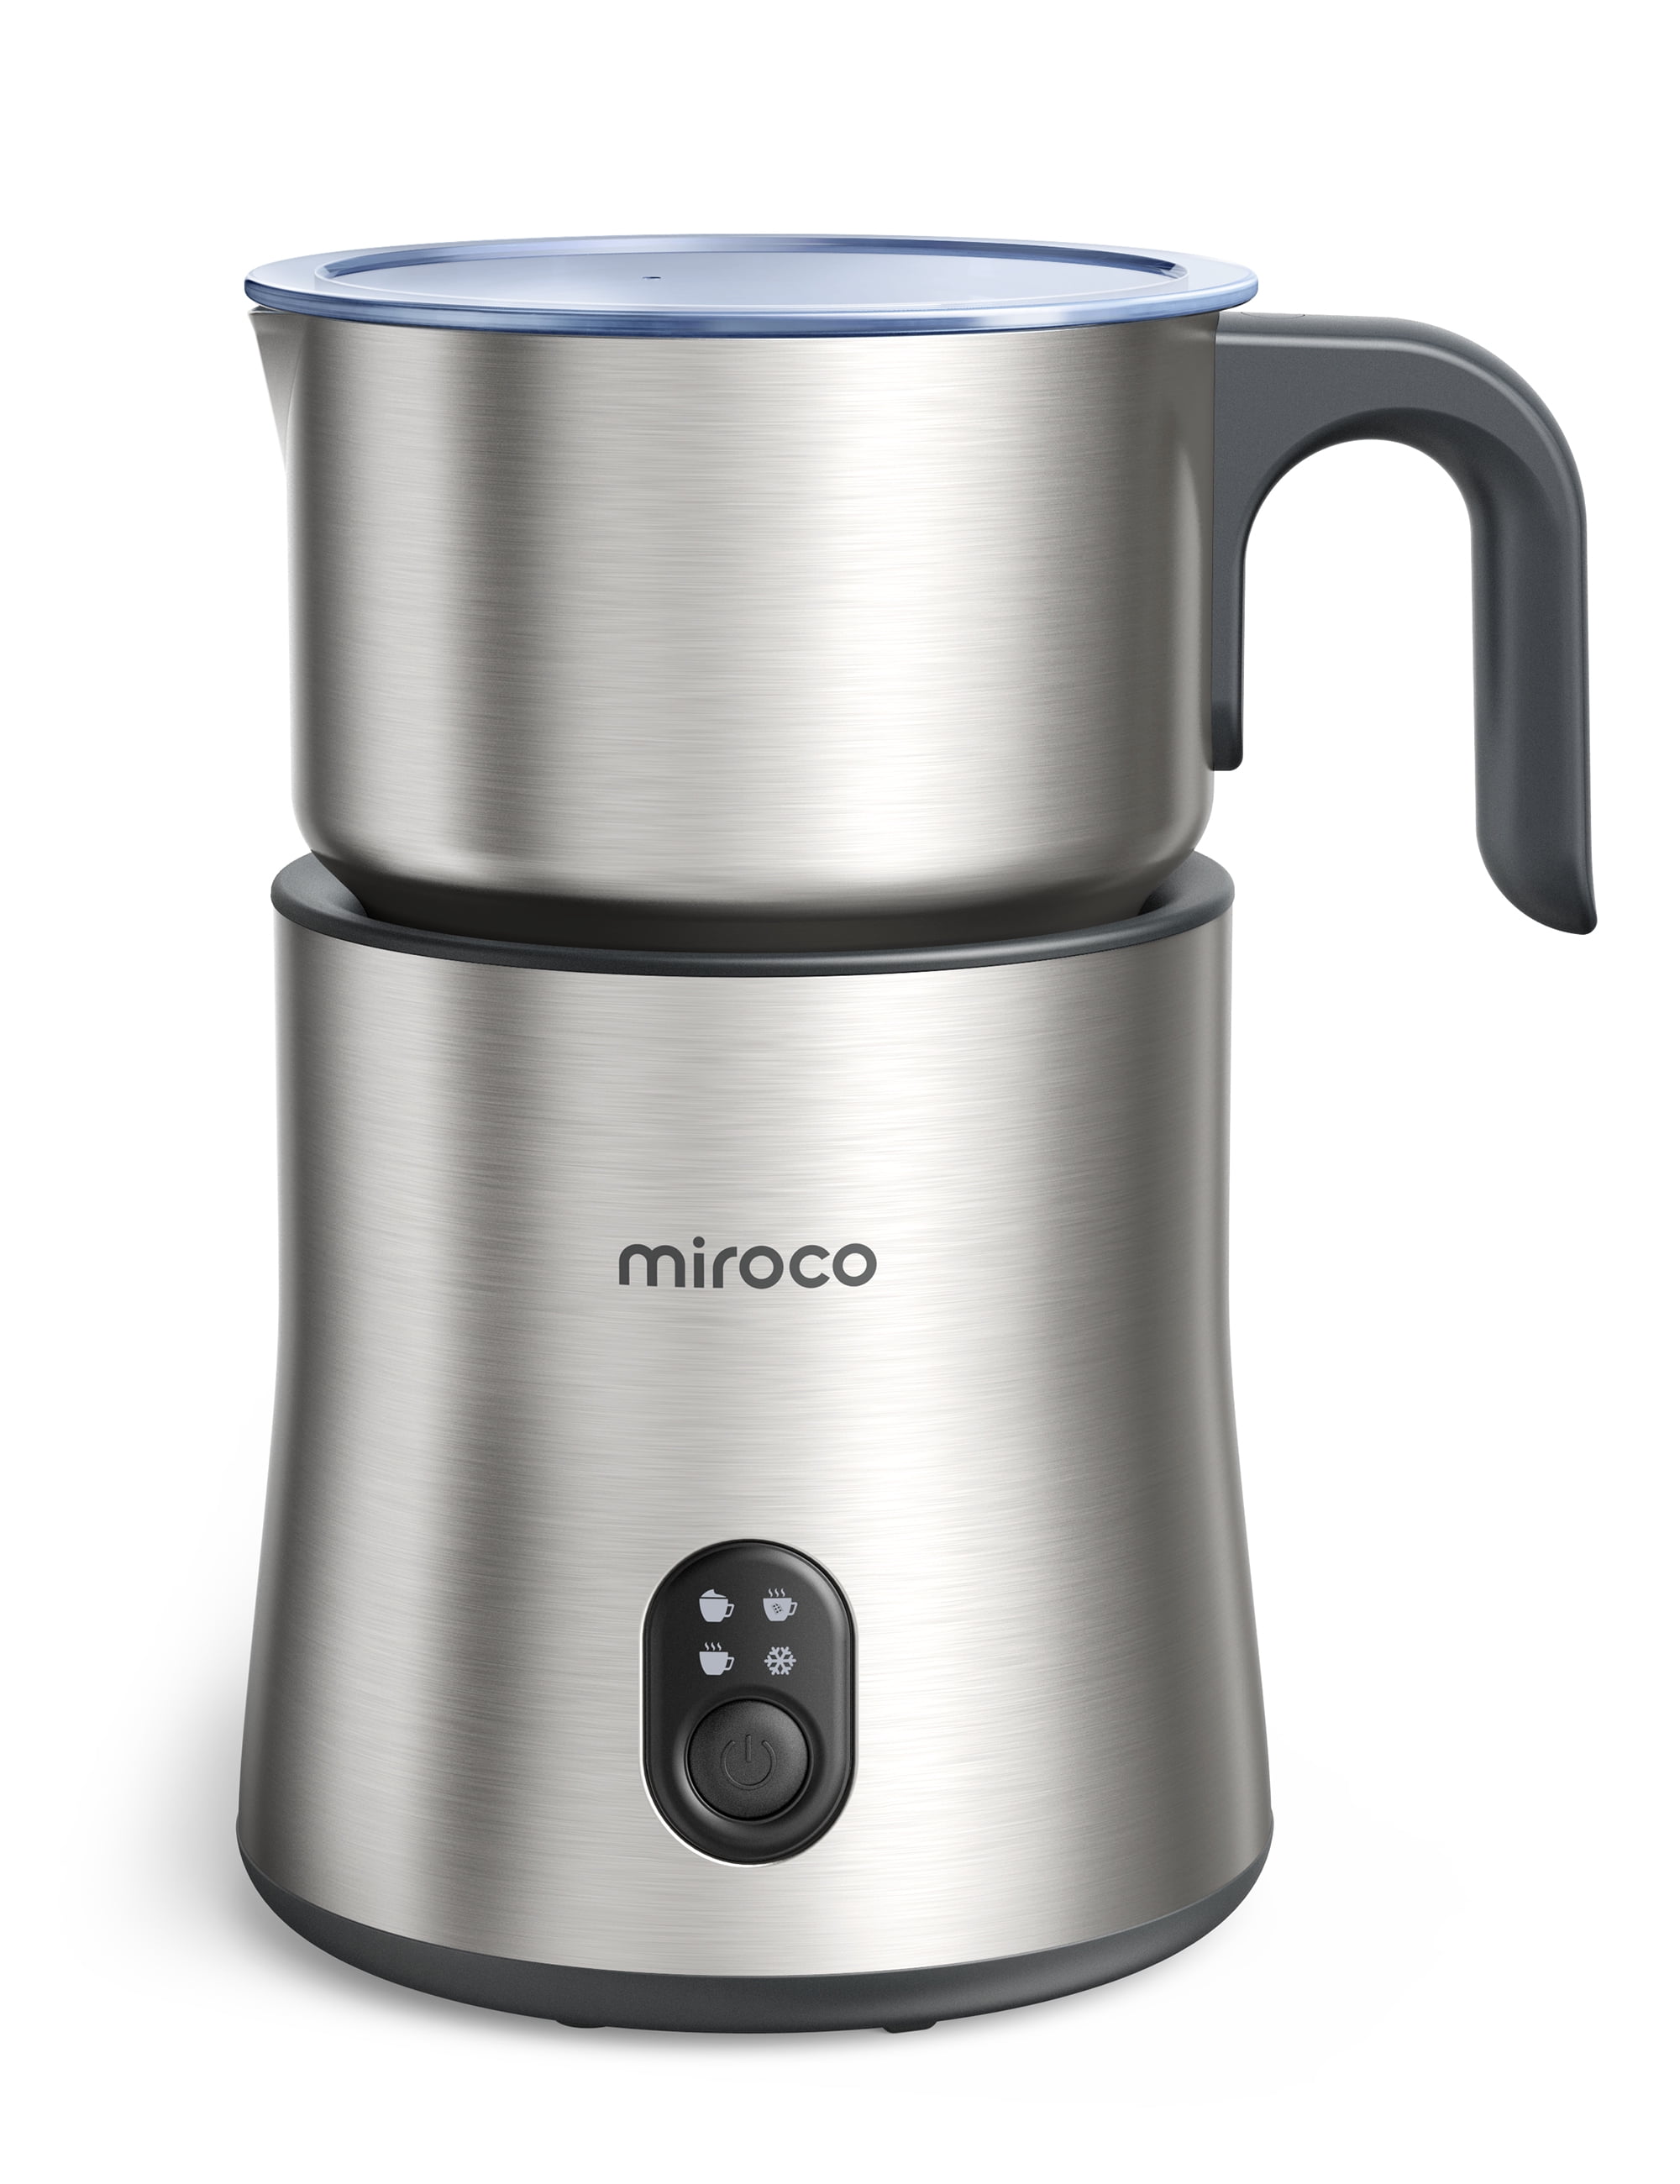 I Bought the Miroco Milk Frother Because of TikTok—and I Love It